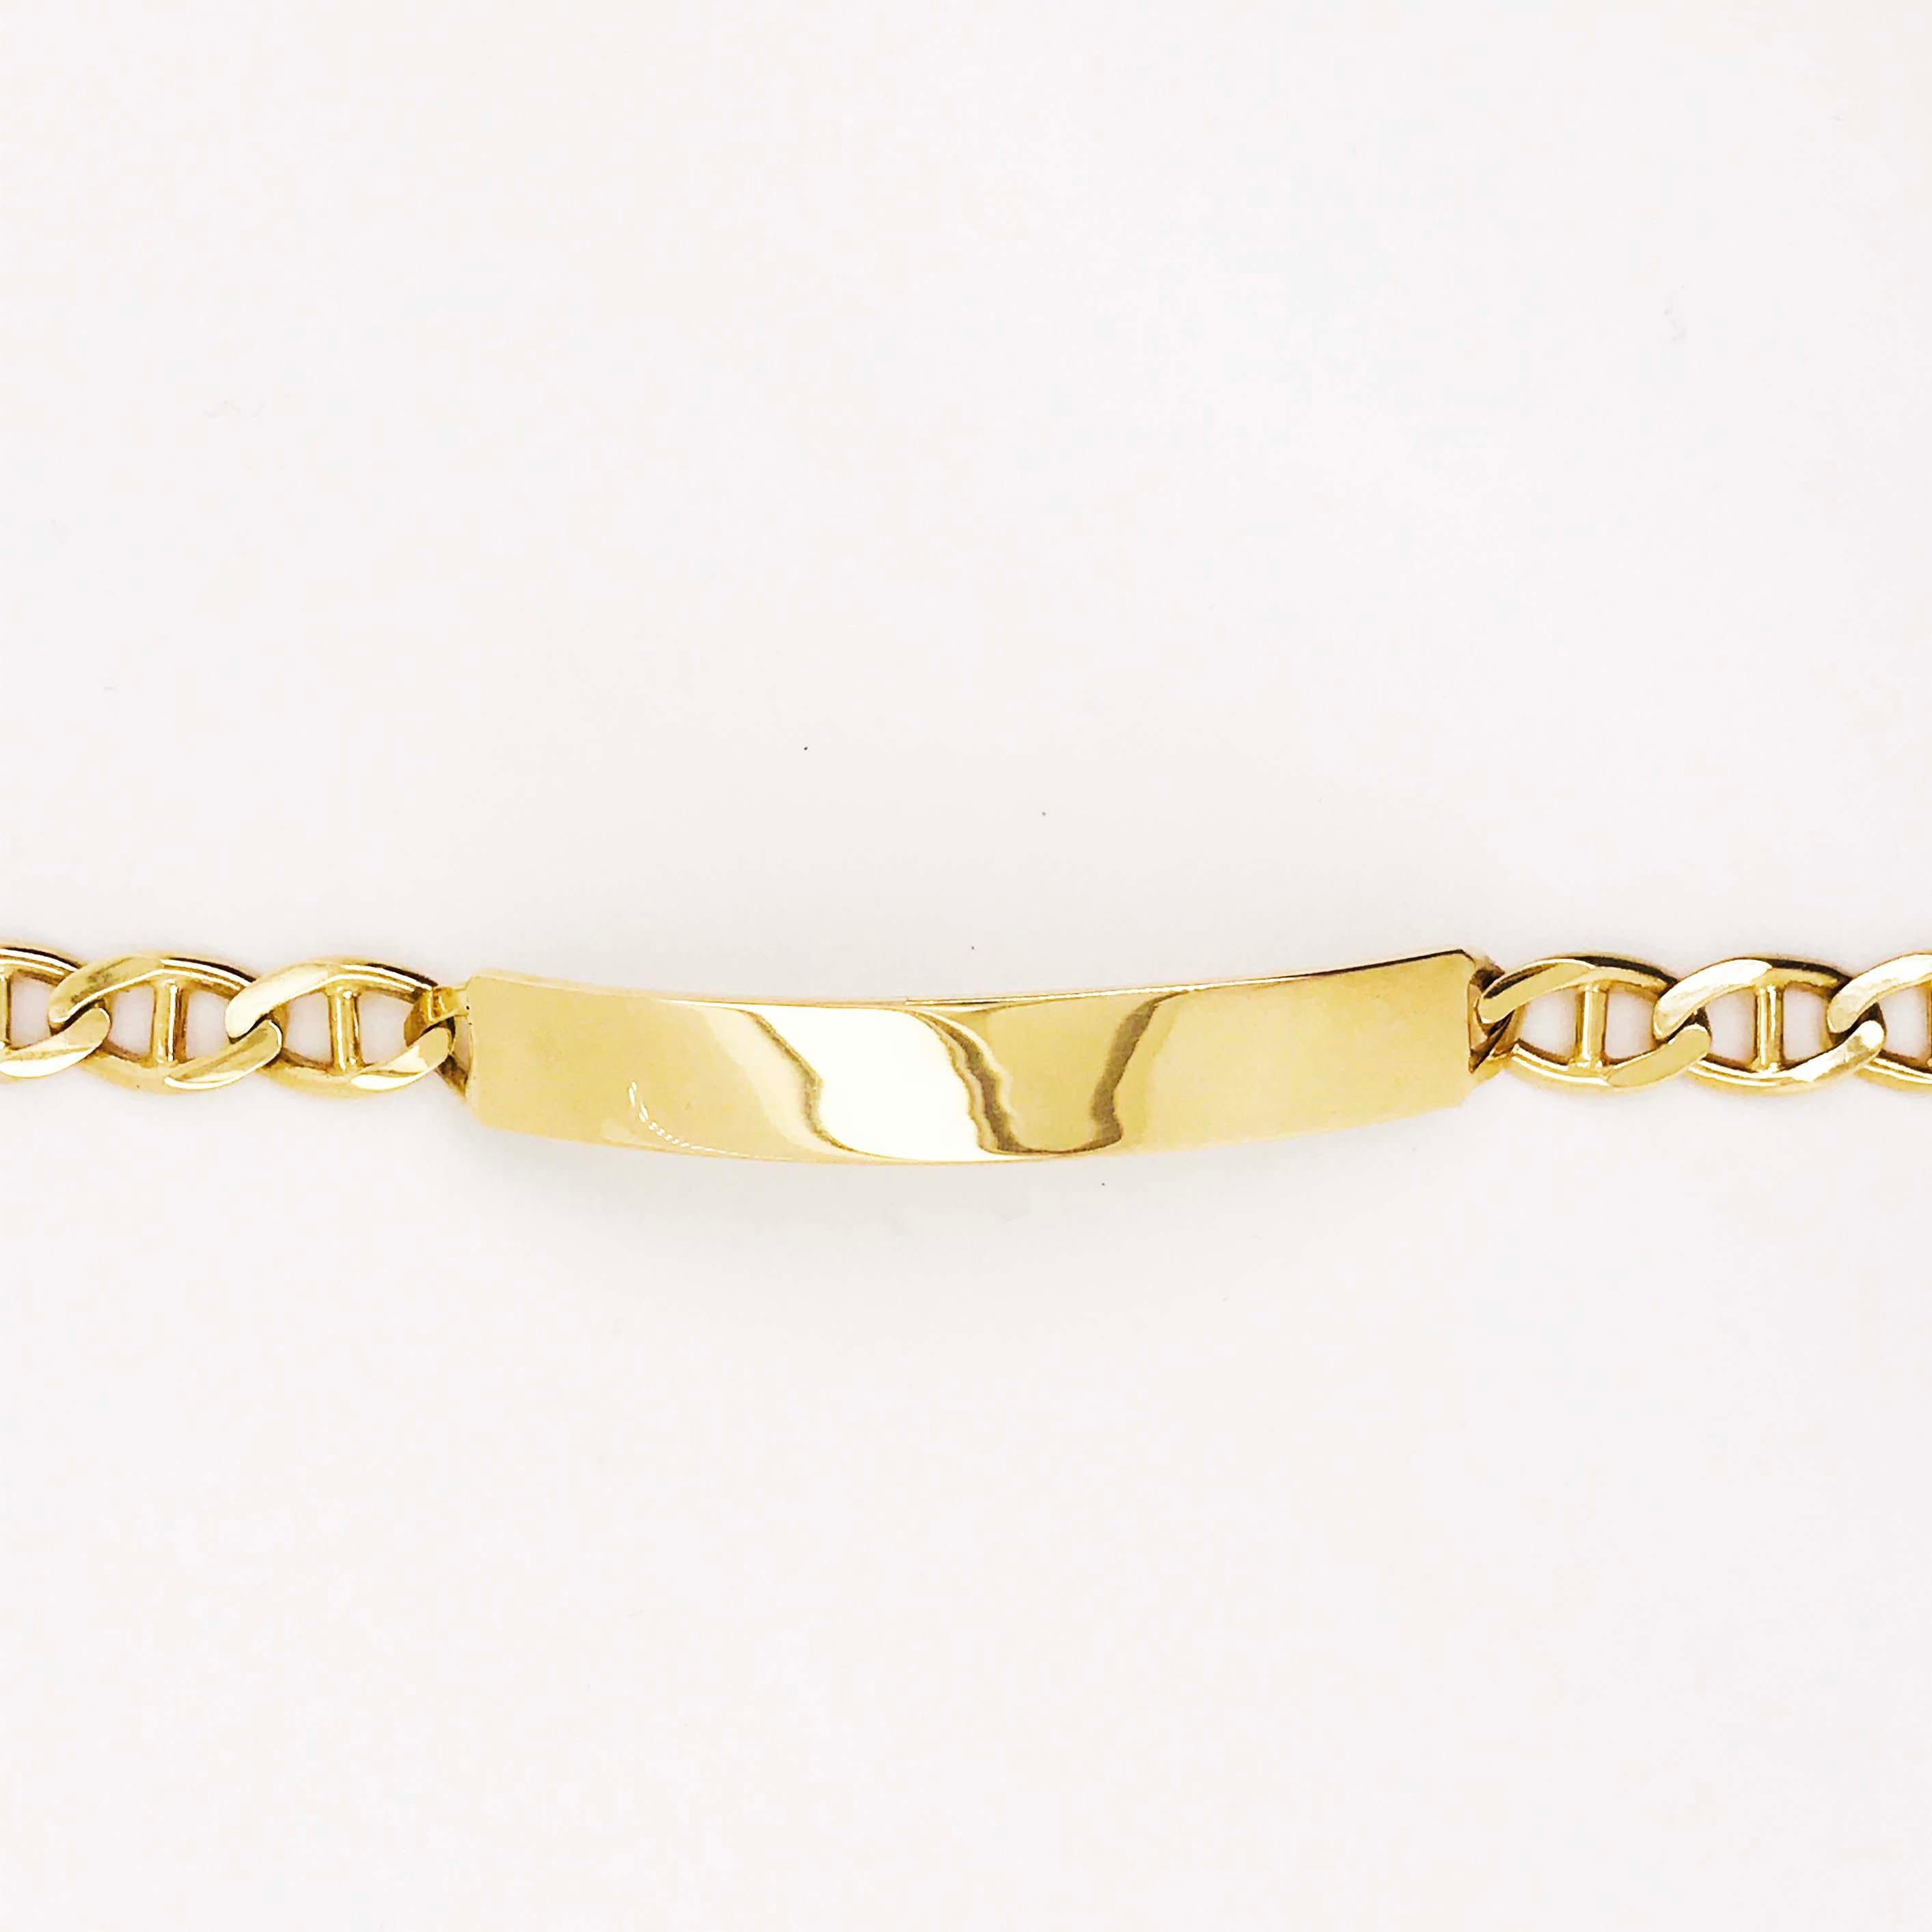 Engravable ID Bracelet in 14 kt Gold with Anchor Link Chain for Men or LG Woman 1